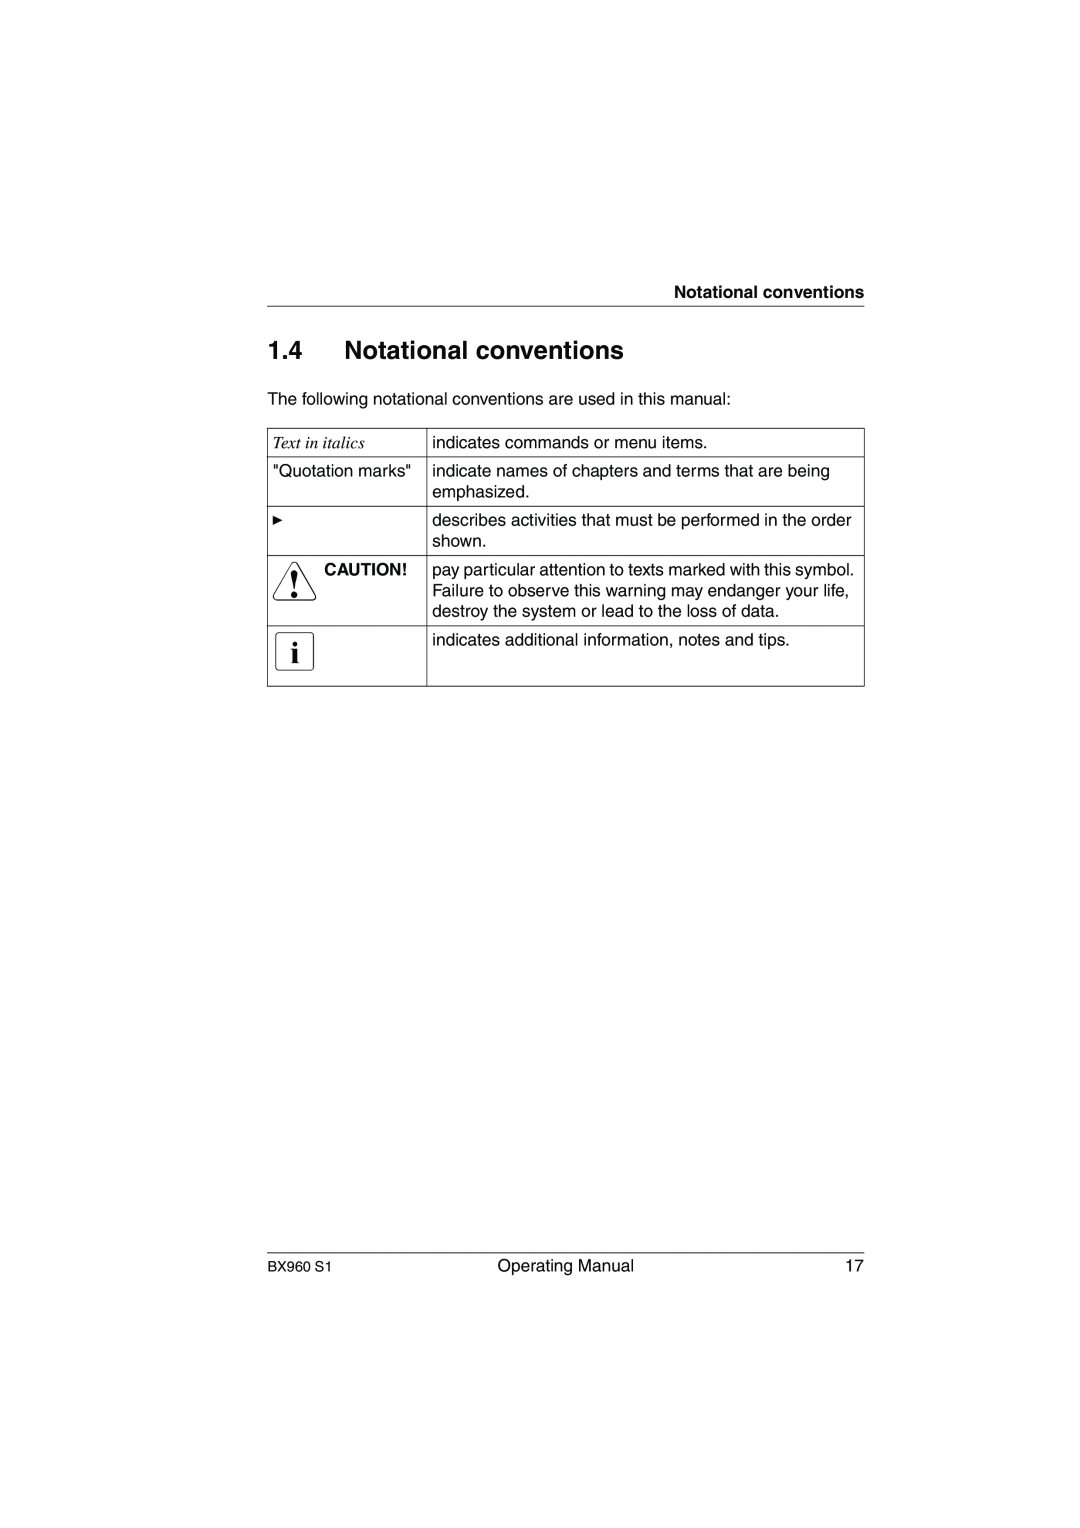 Fujitsu BX960 S1 manual Notational conventions, Text in italics 